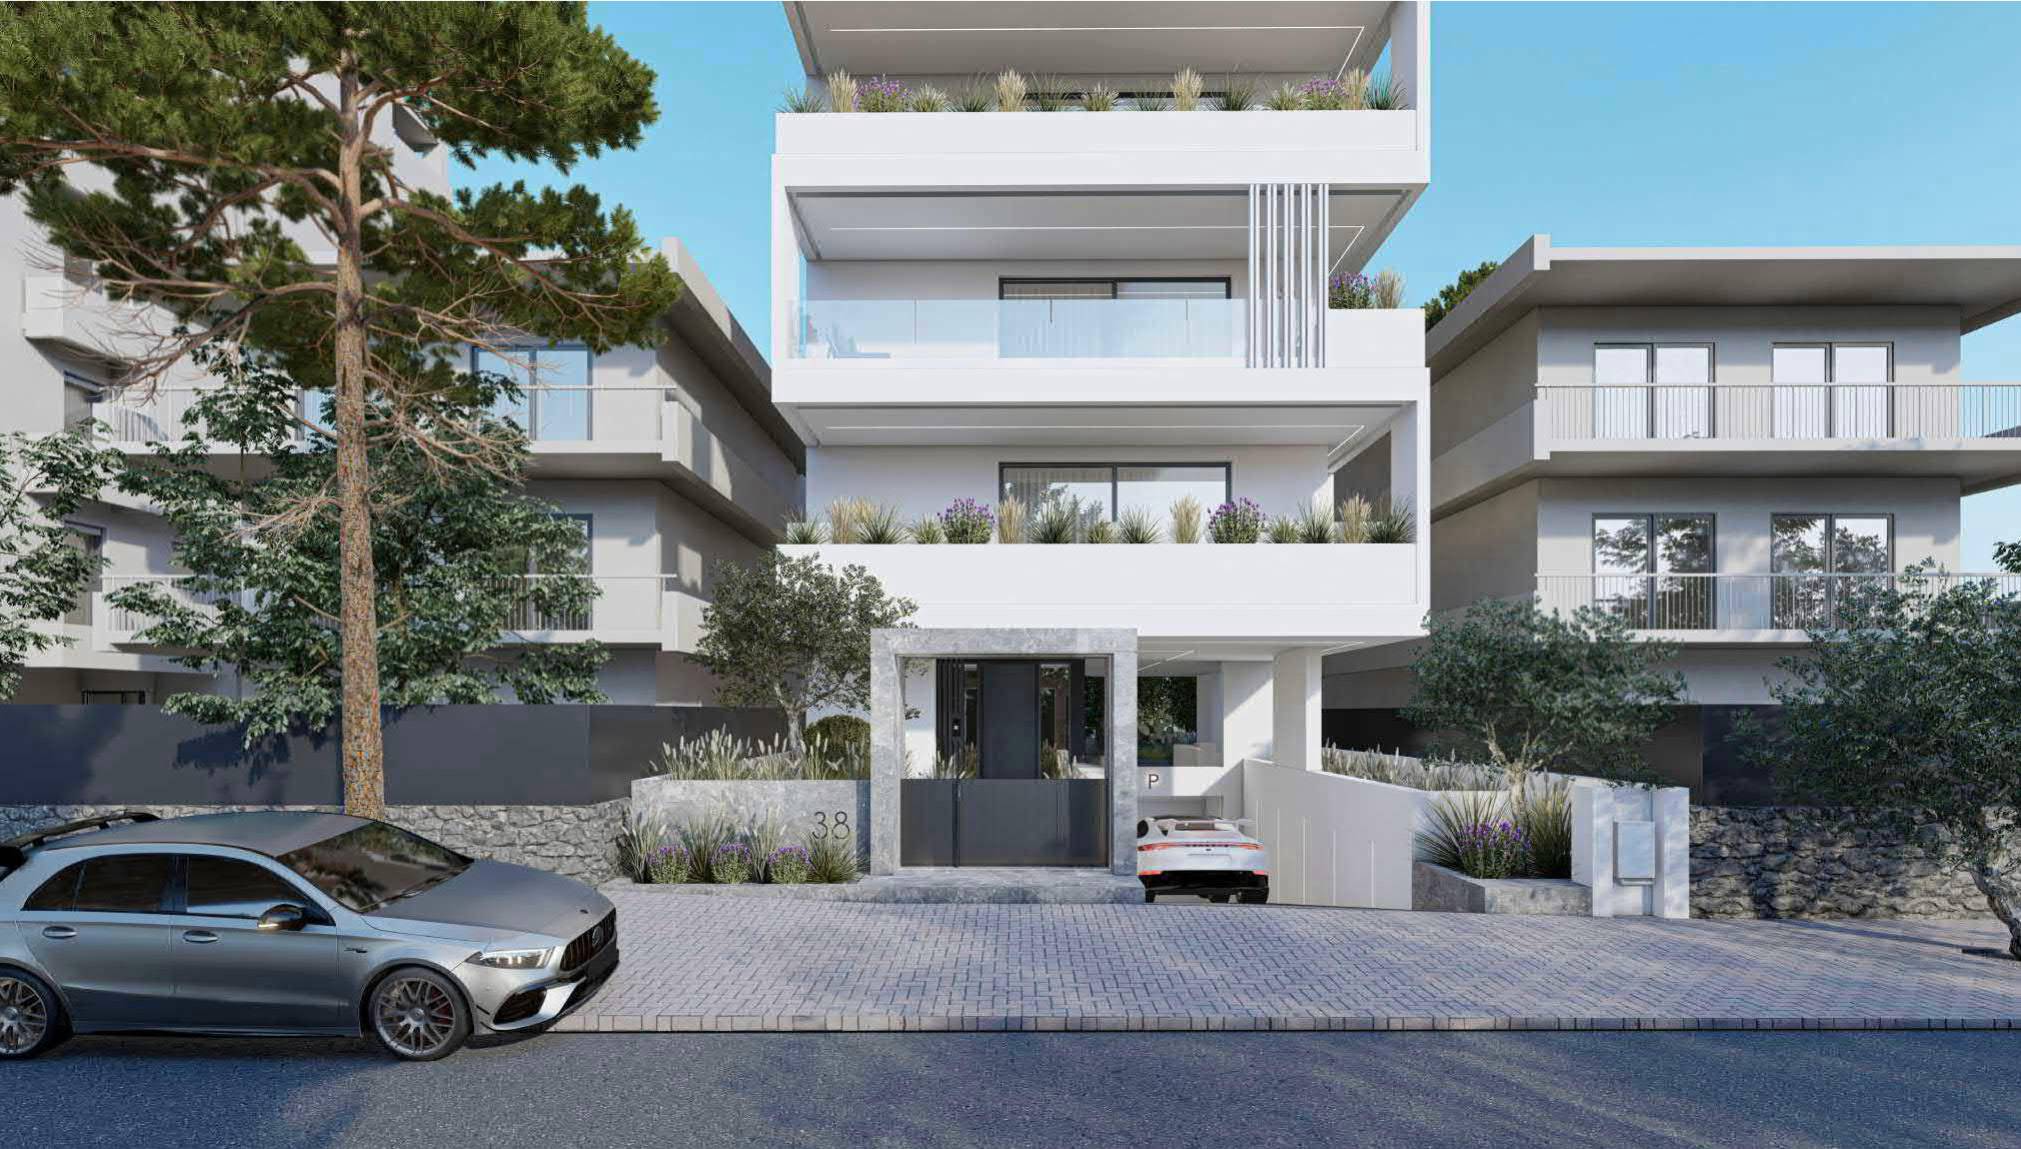 6th  & 7th Floor Penthouse Maisonette with exclusive use of a 98sqm terrace/pergola use in a prime location in Paleo Faliro